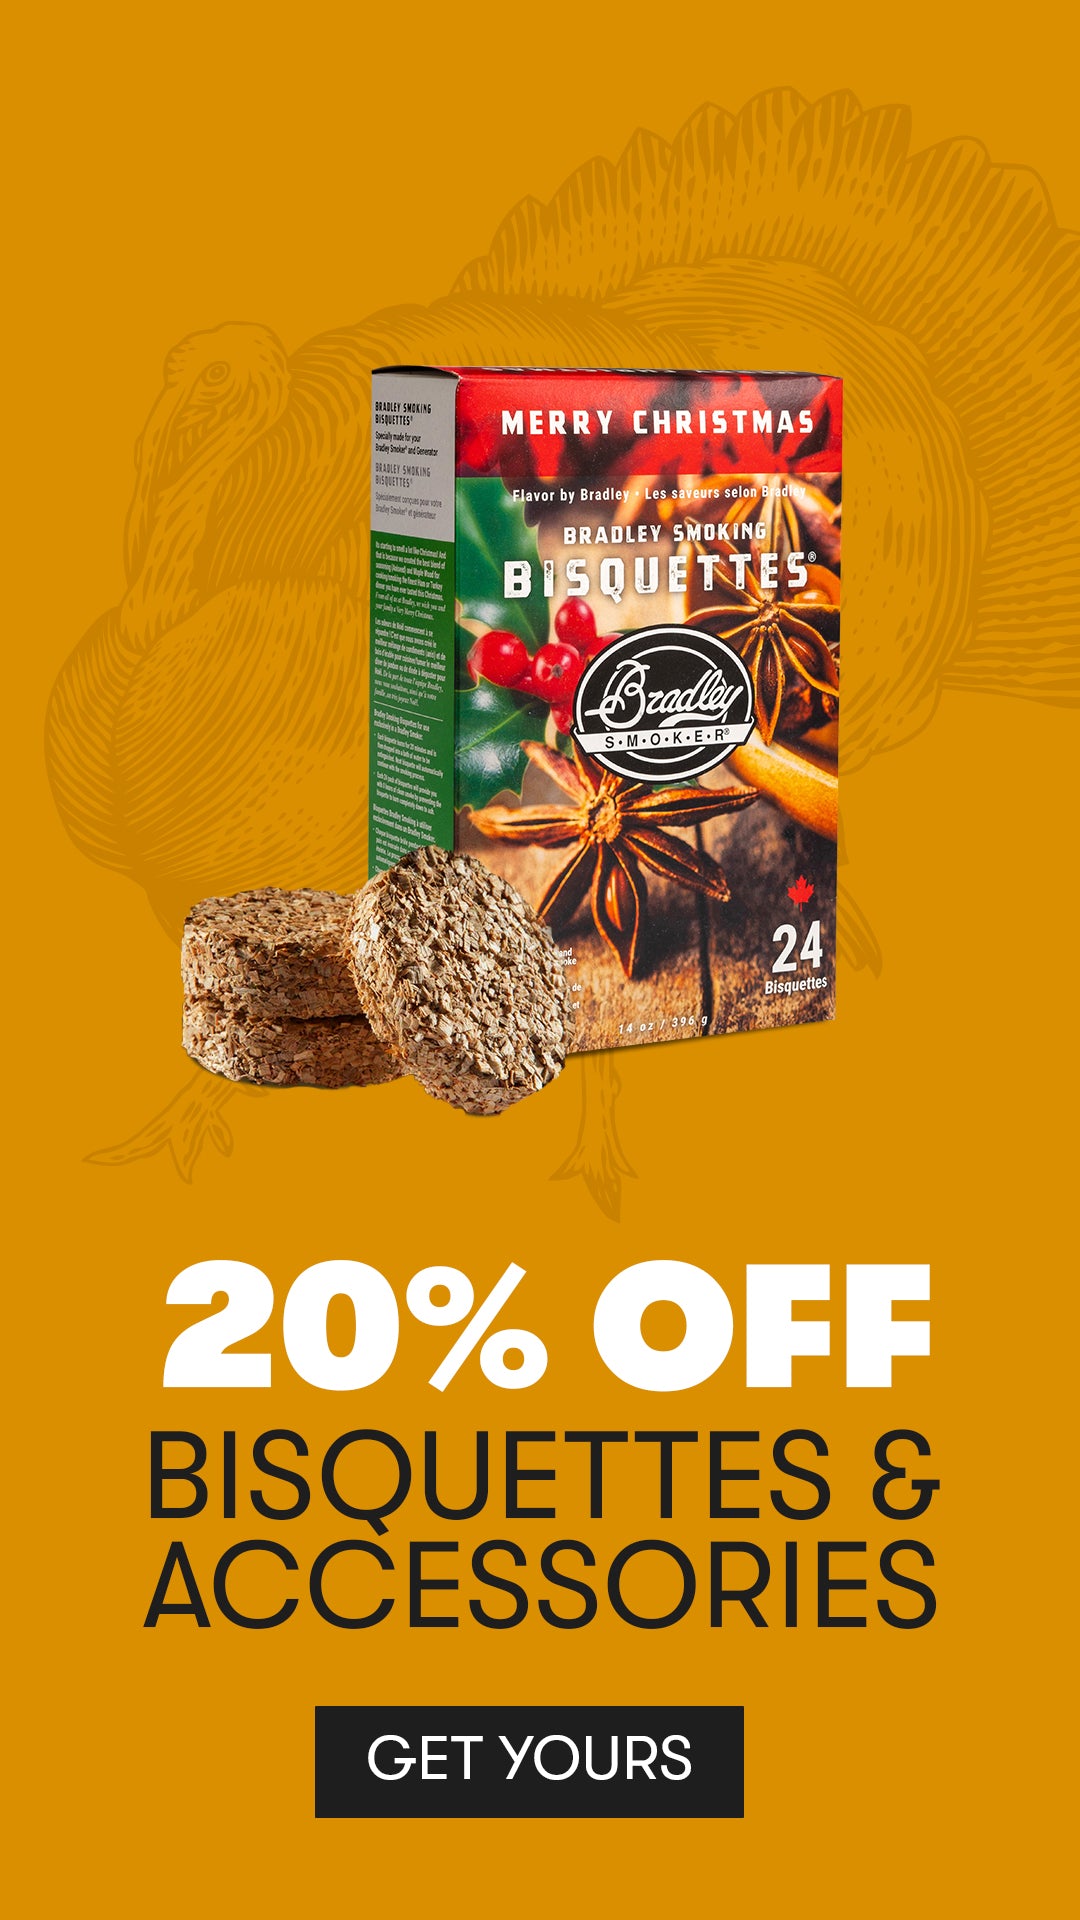 Black Friday Sale - SAT and SUN Only - 20% off bisquettes & accessories
*Sale applies to orders on bradleysmoker.ca